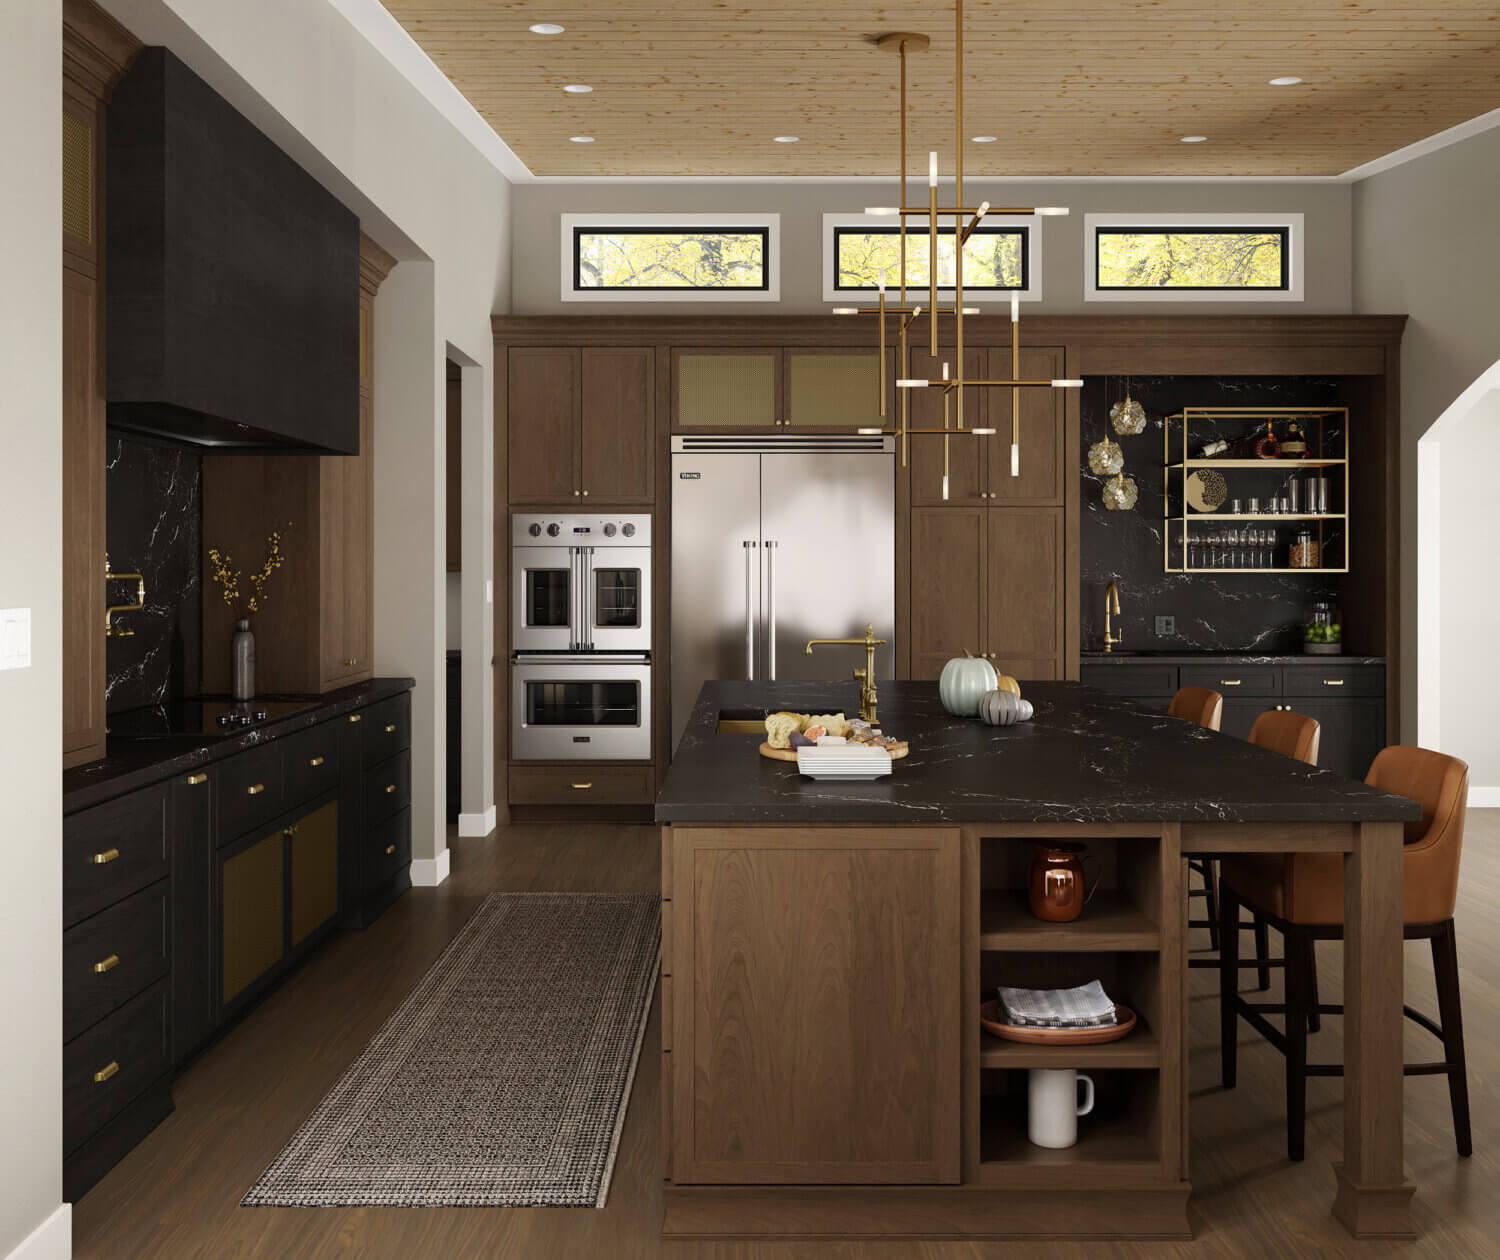 A pretty kitchen remodel with a stained wood cabinets in two tones of black and medium brown.